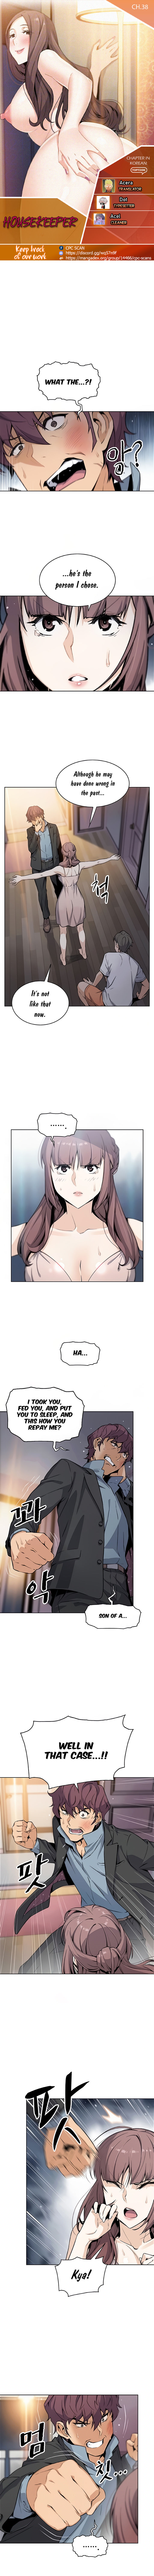 Housekeeper Manhwa - Chapter 38 Page 1